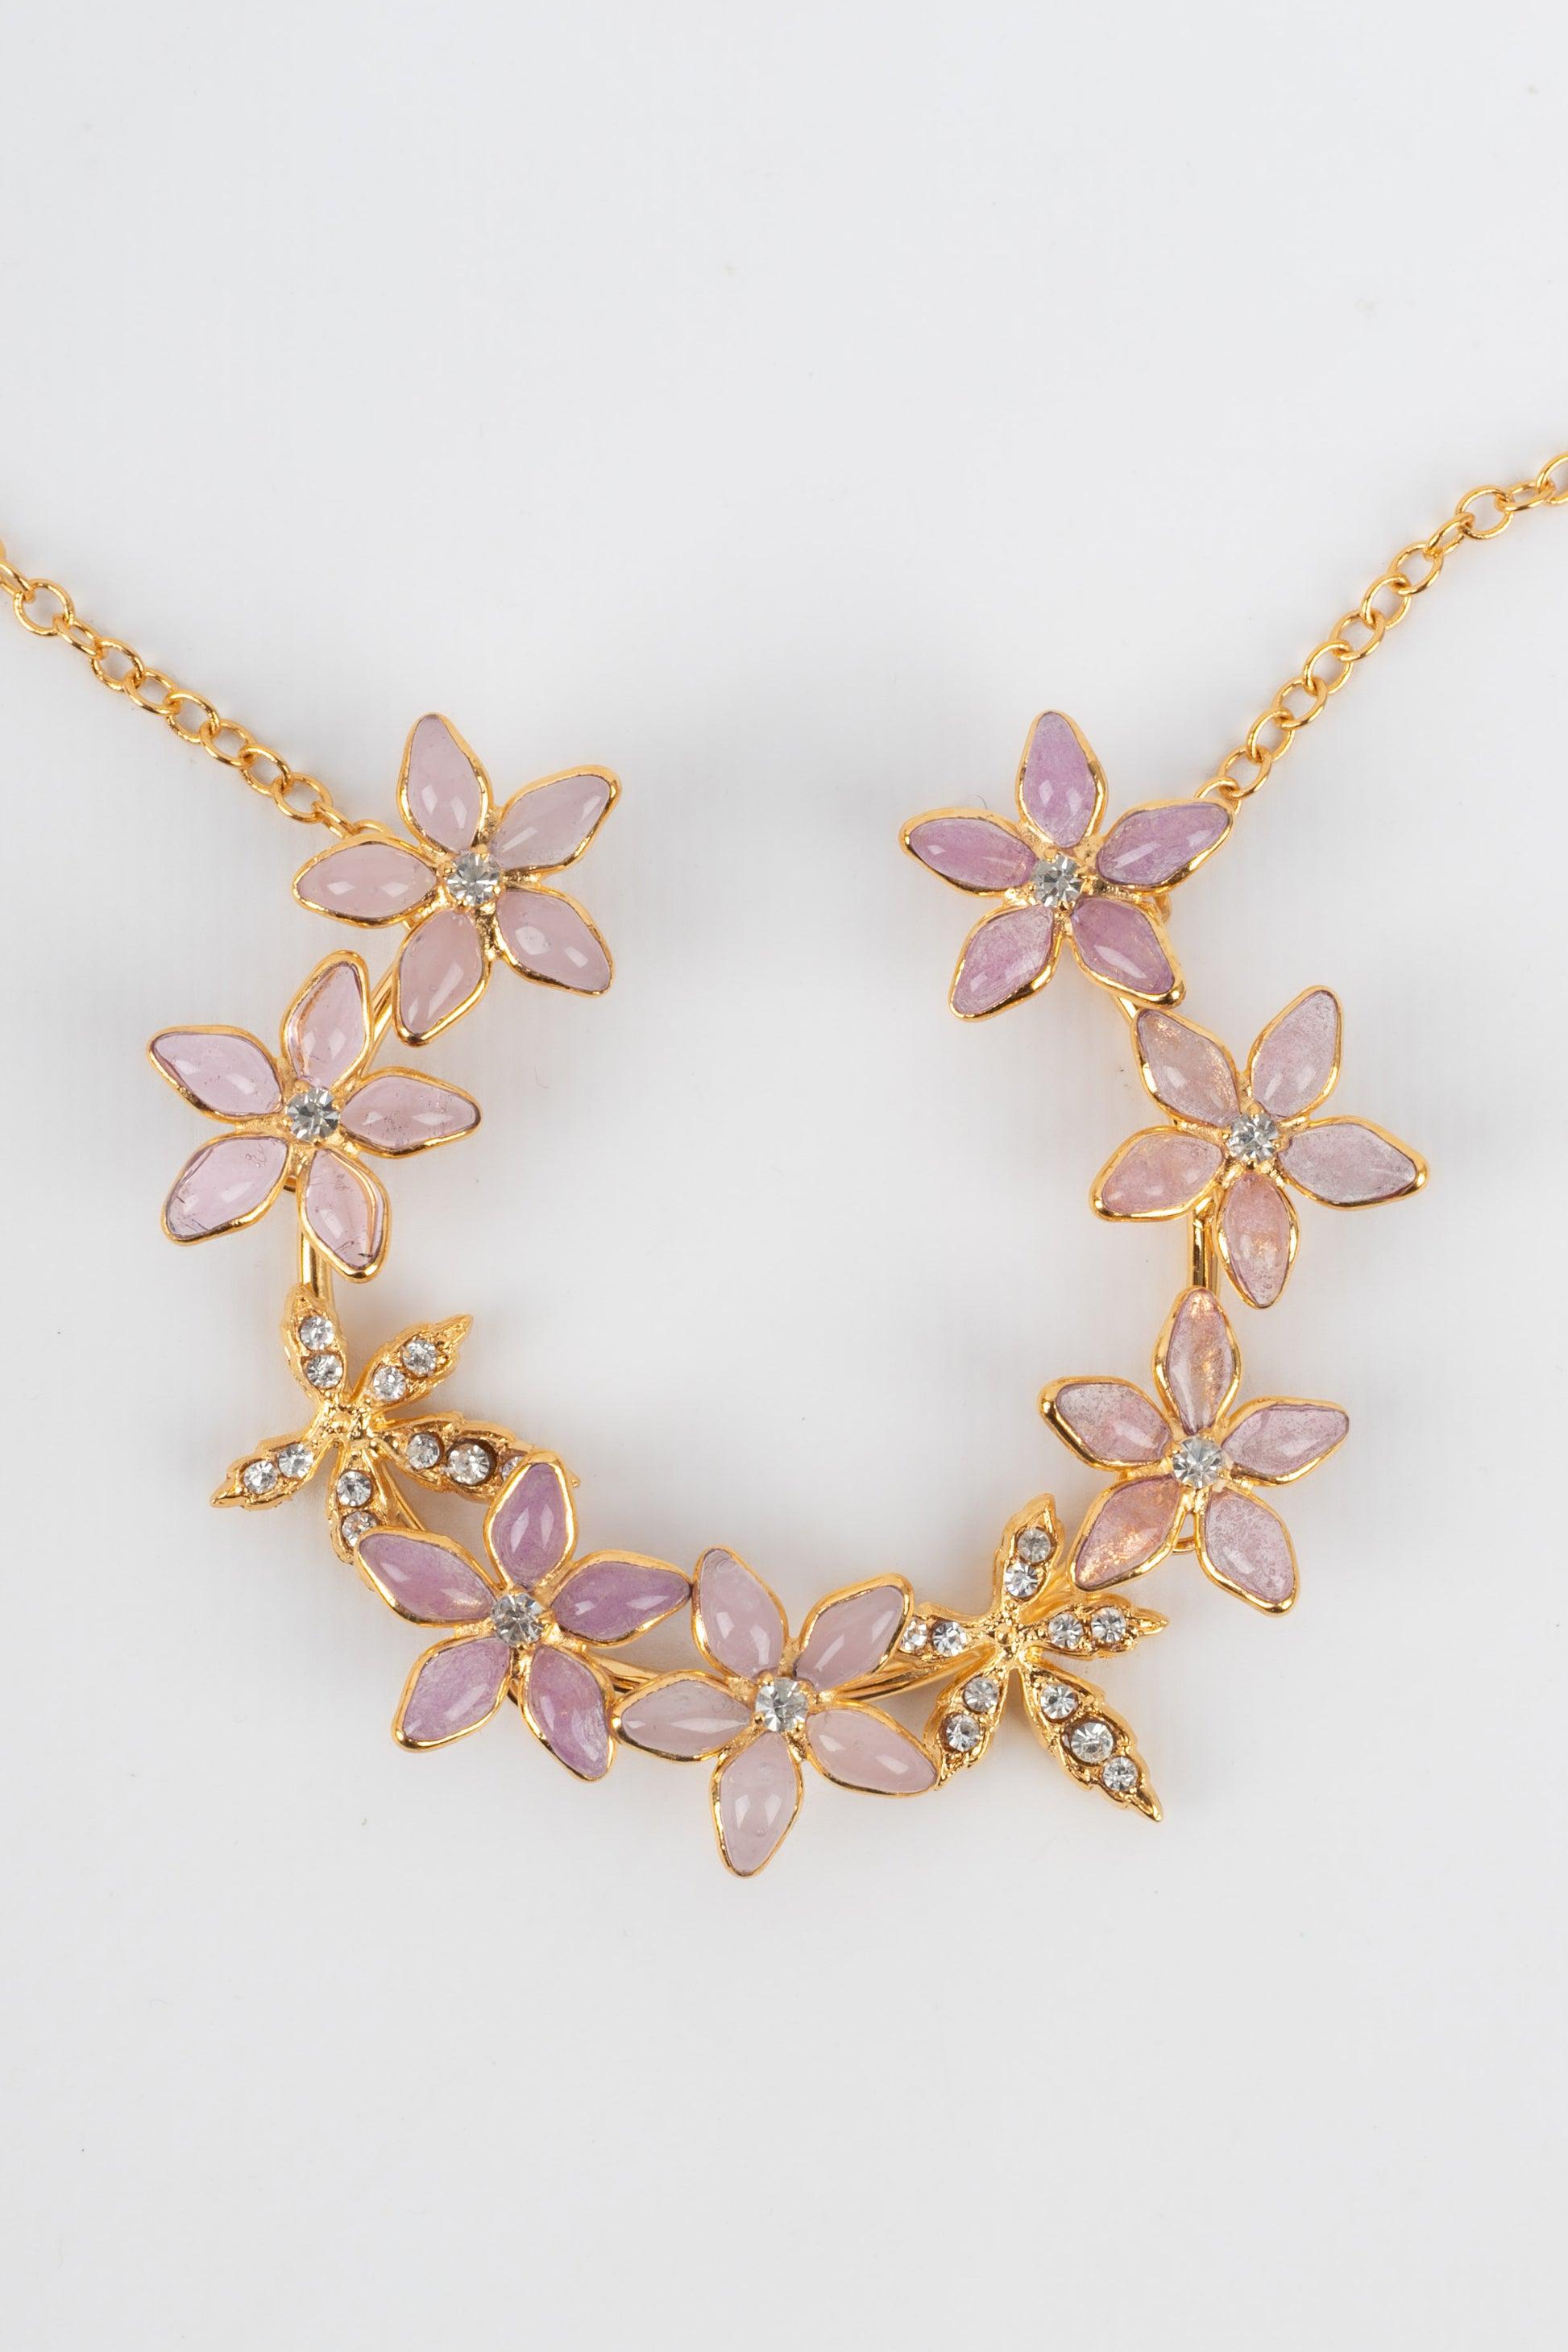 Augustine Golden Metal Necklace with Rhinestones and Glass Paste Pale Pink Tones For Sale 3